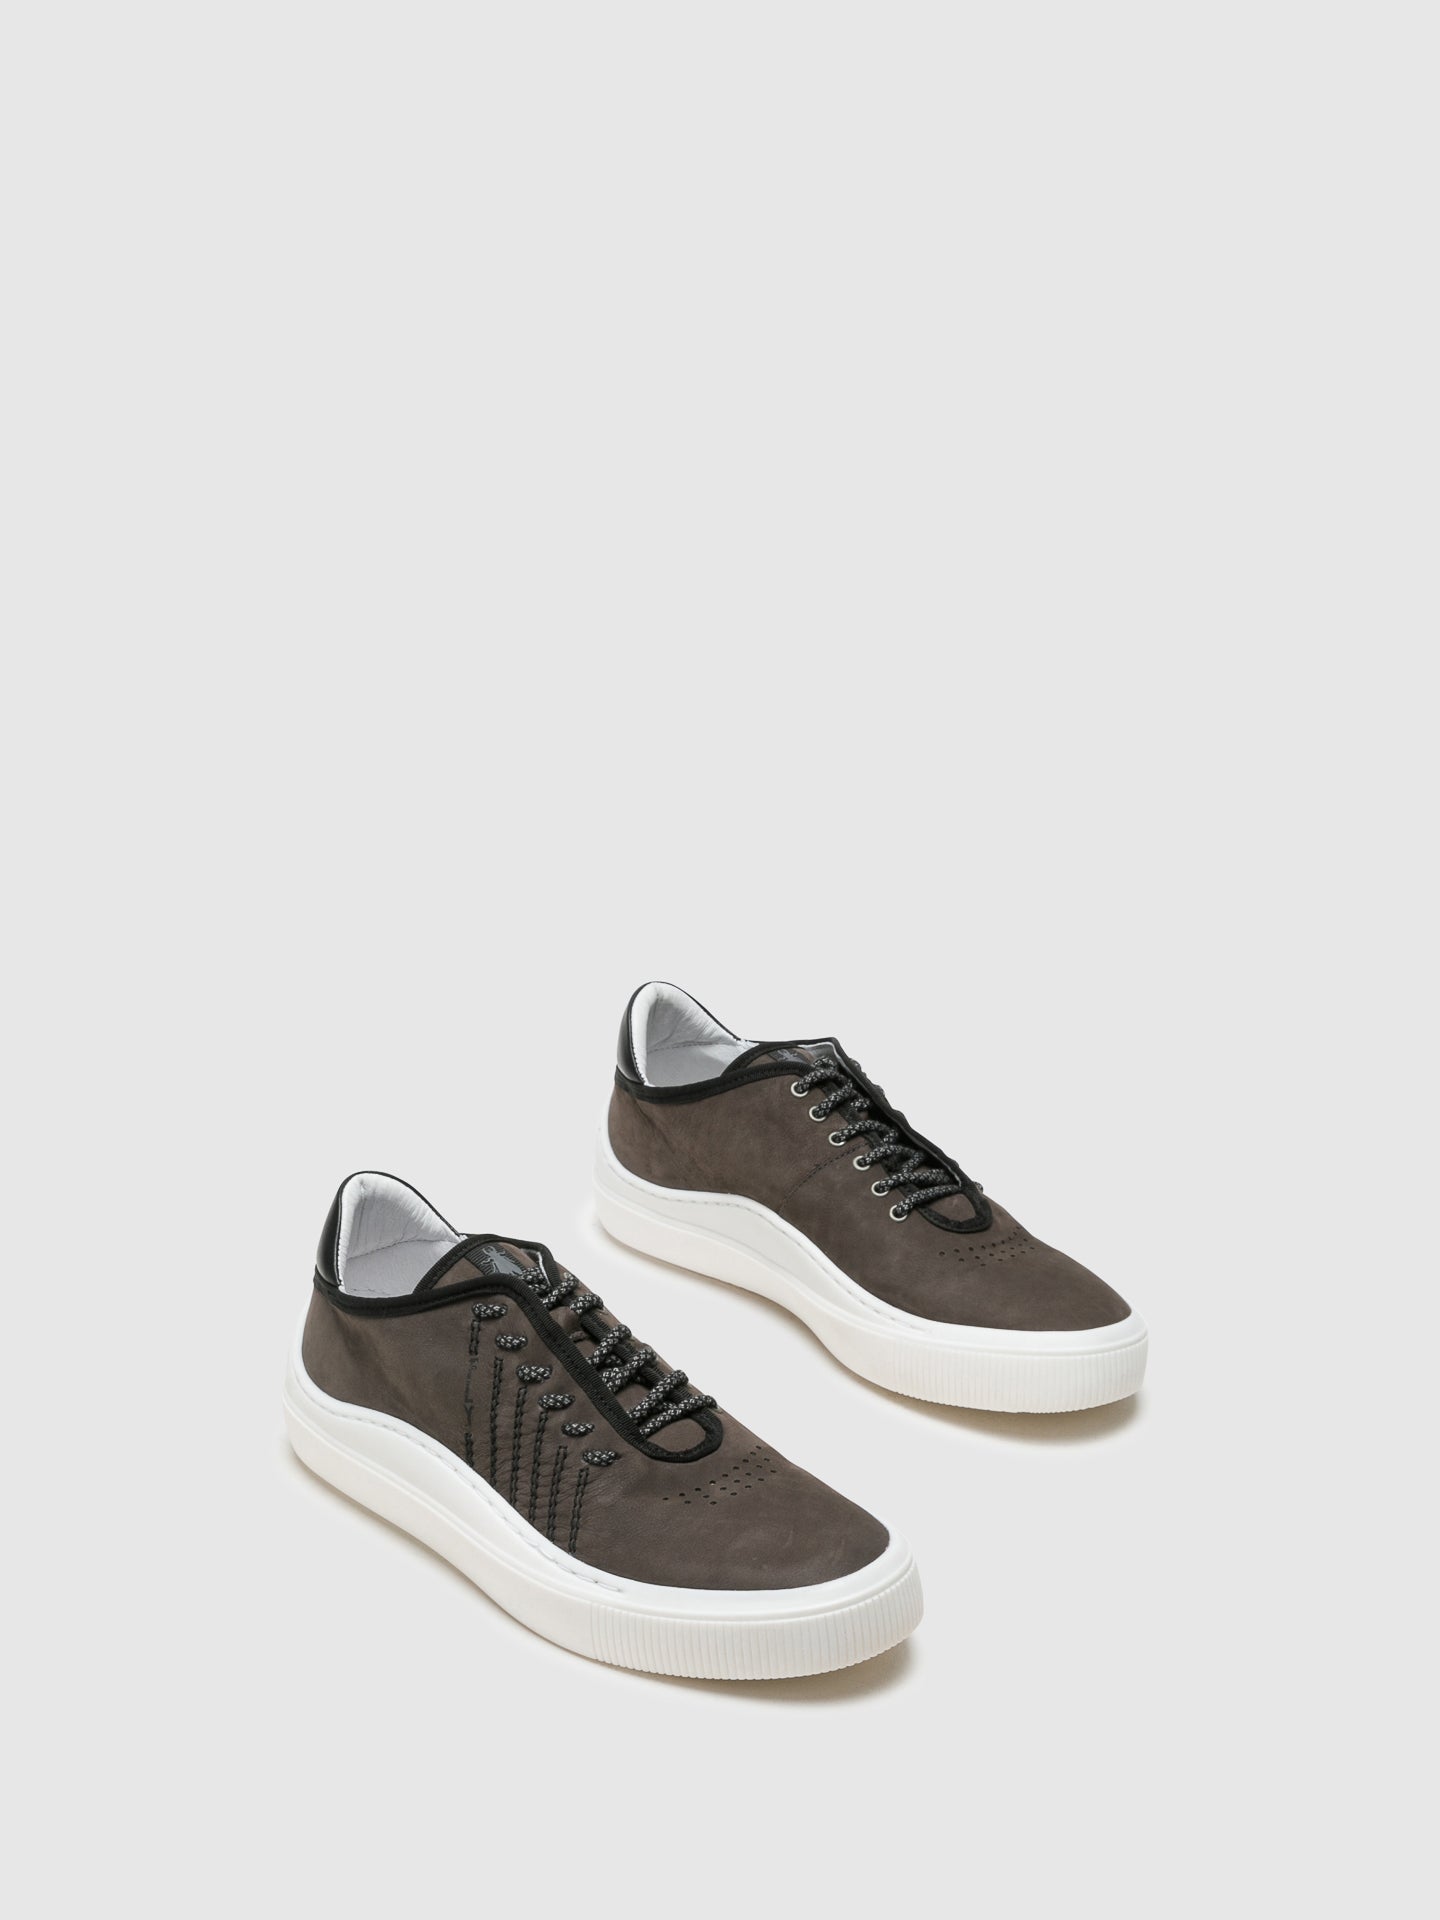 Fly London Lace-up Trainers SUMA356FLY Gray